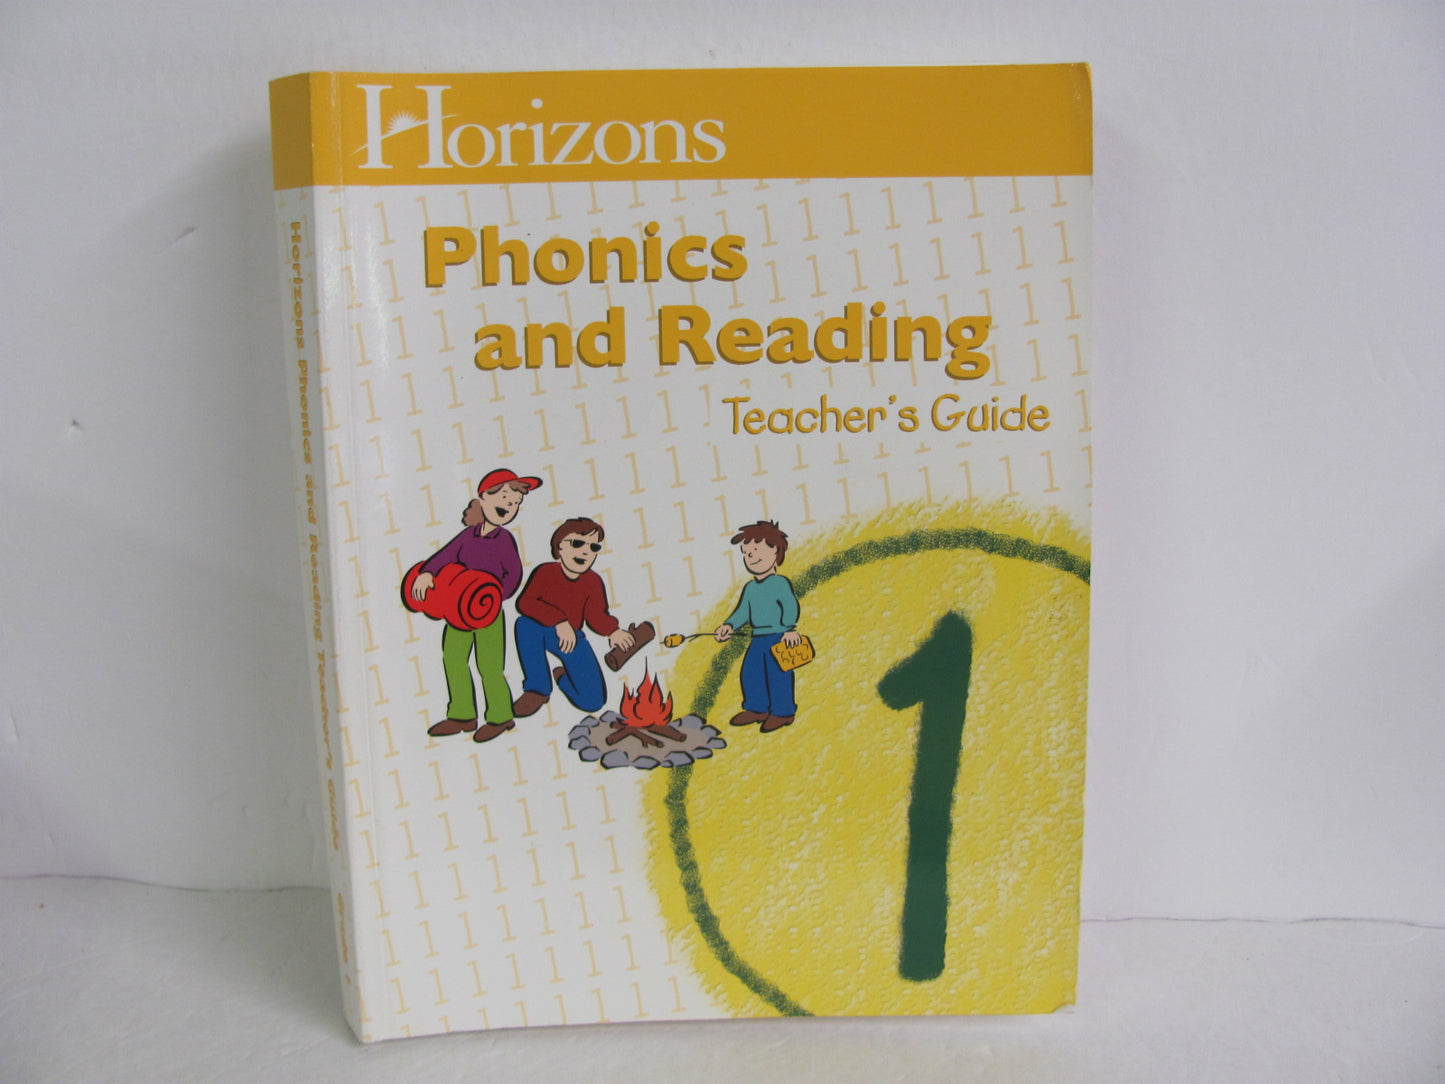 Phonics and Reading Horizons Teacher Guide  Pre-Owned Reading Textbooks